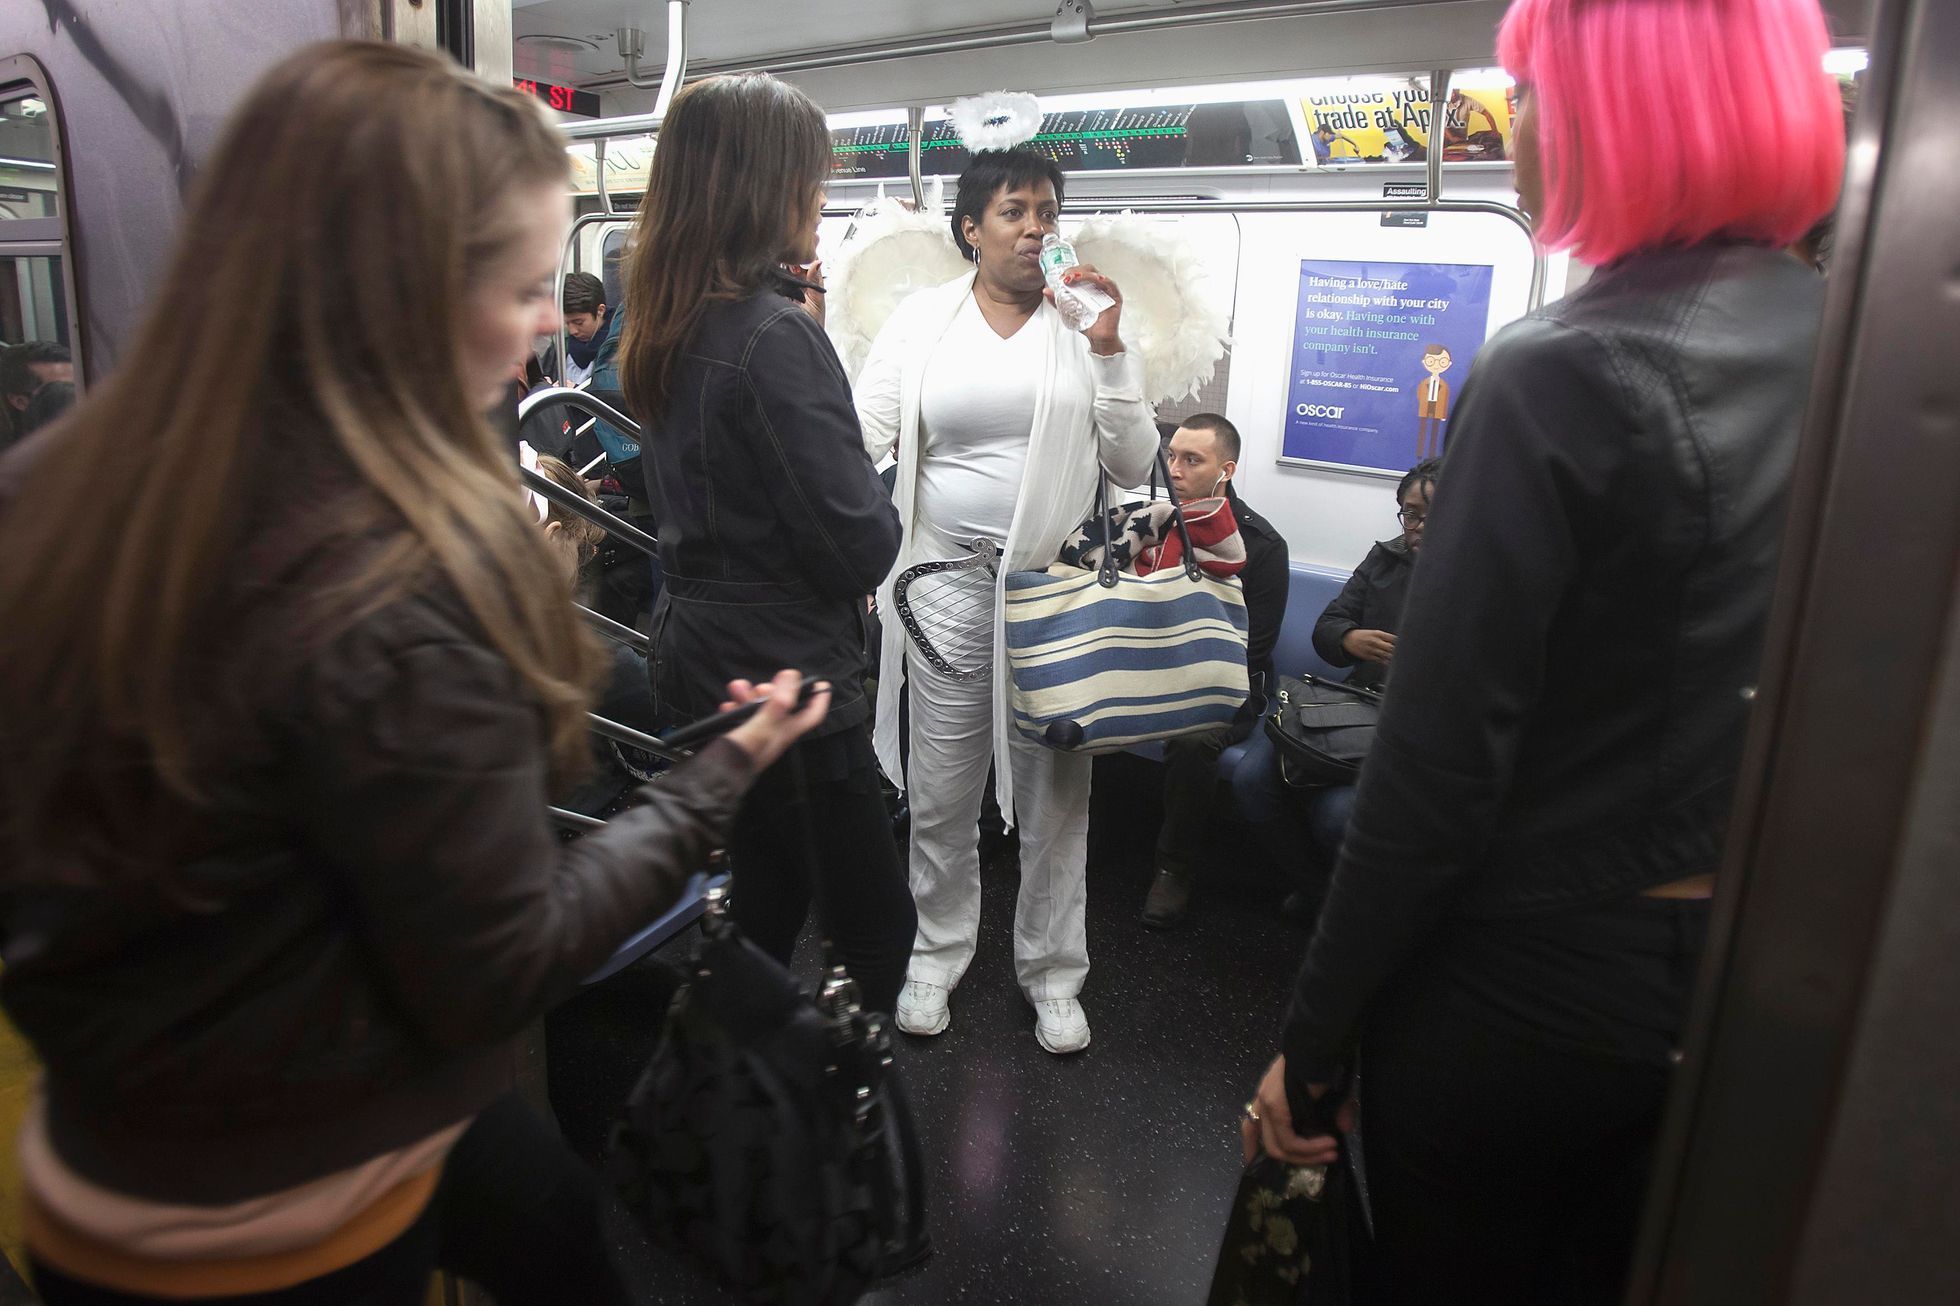 A participant in the Village Halloween Parade rides the subway dressed as an angel after the parade in the Manhattan borough of New York